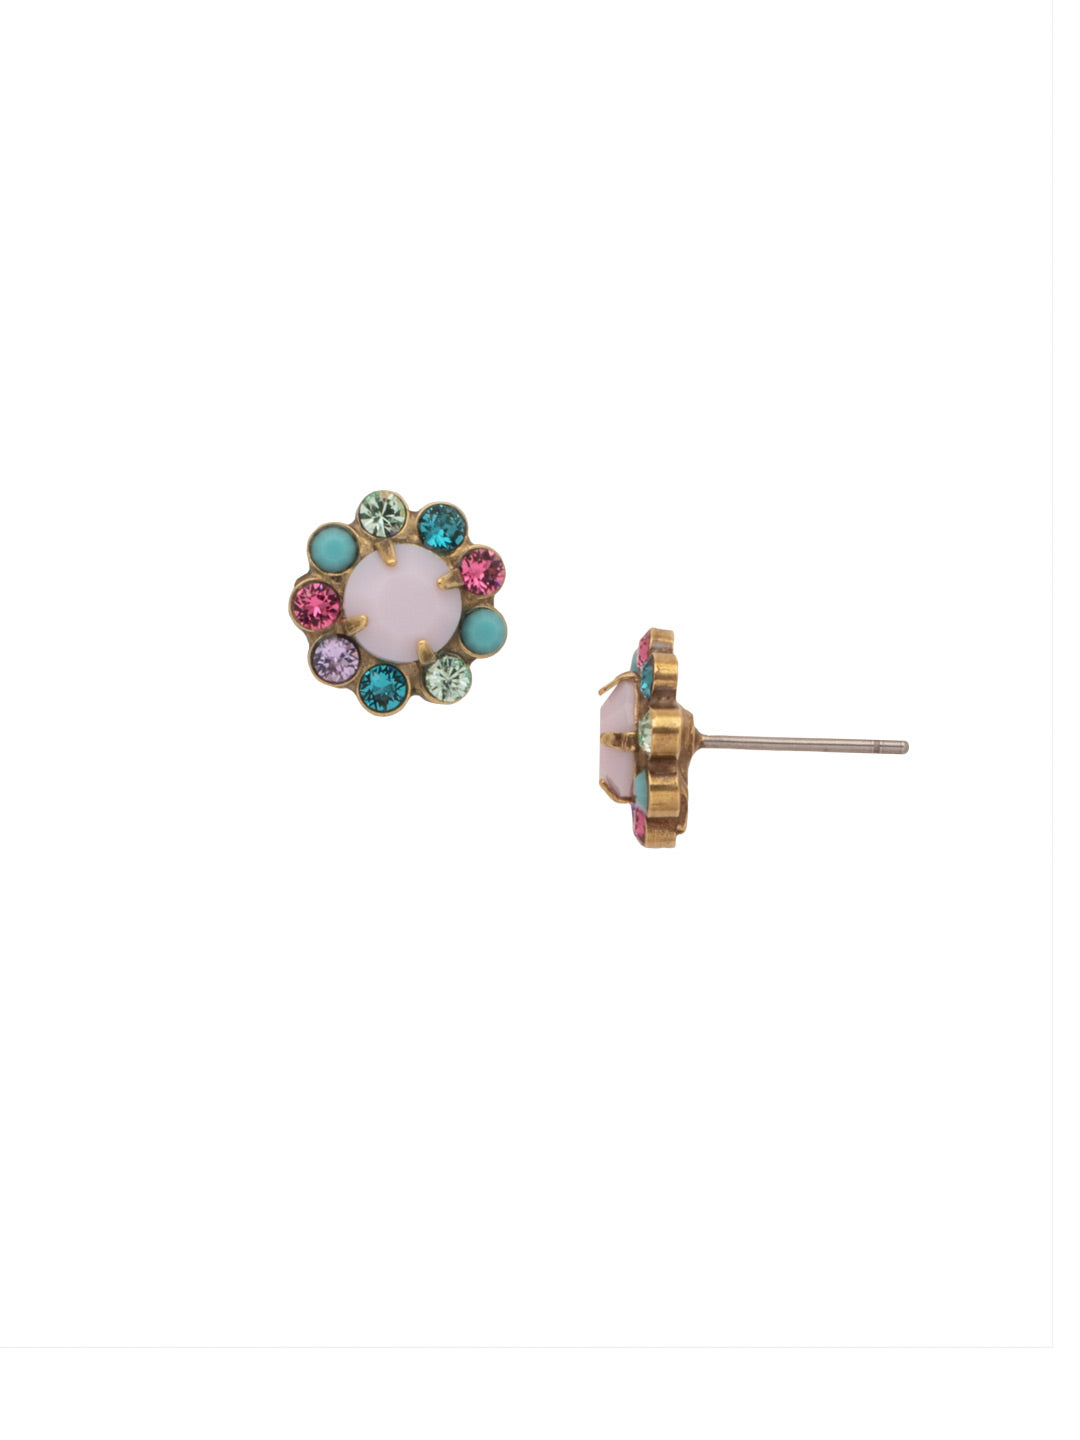 Best Bud Stud Earrings - EDM41AGHB - <p>This budding beauty features a nature-inspired design perfect for everyday wear. From Sorrelli's Happy Birthday collection in our Antique Gold-tone finish.</p>